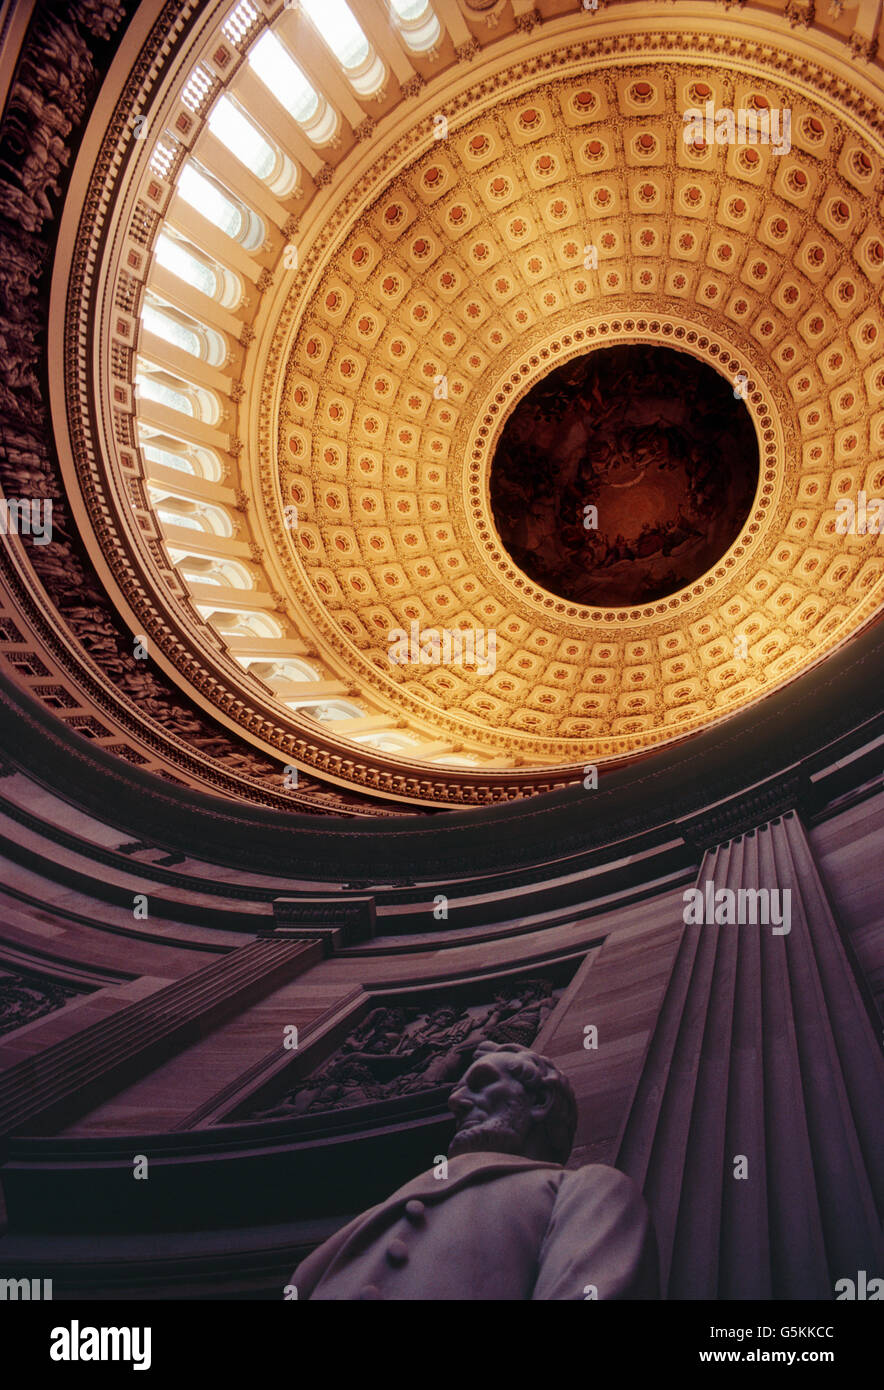 Interior view of the United States of America Capital Rotunda dome; Washington D. C. Abraham Lincoln statue foreground Stock Photo